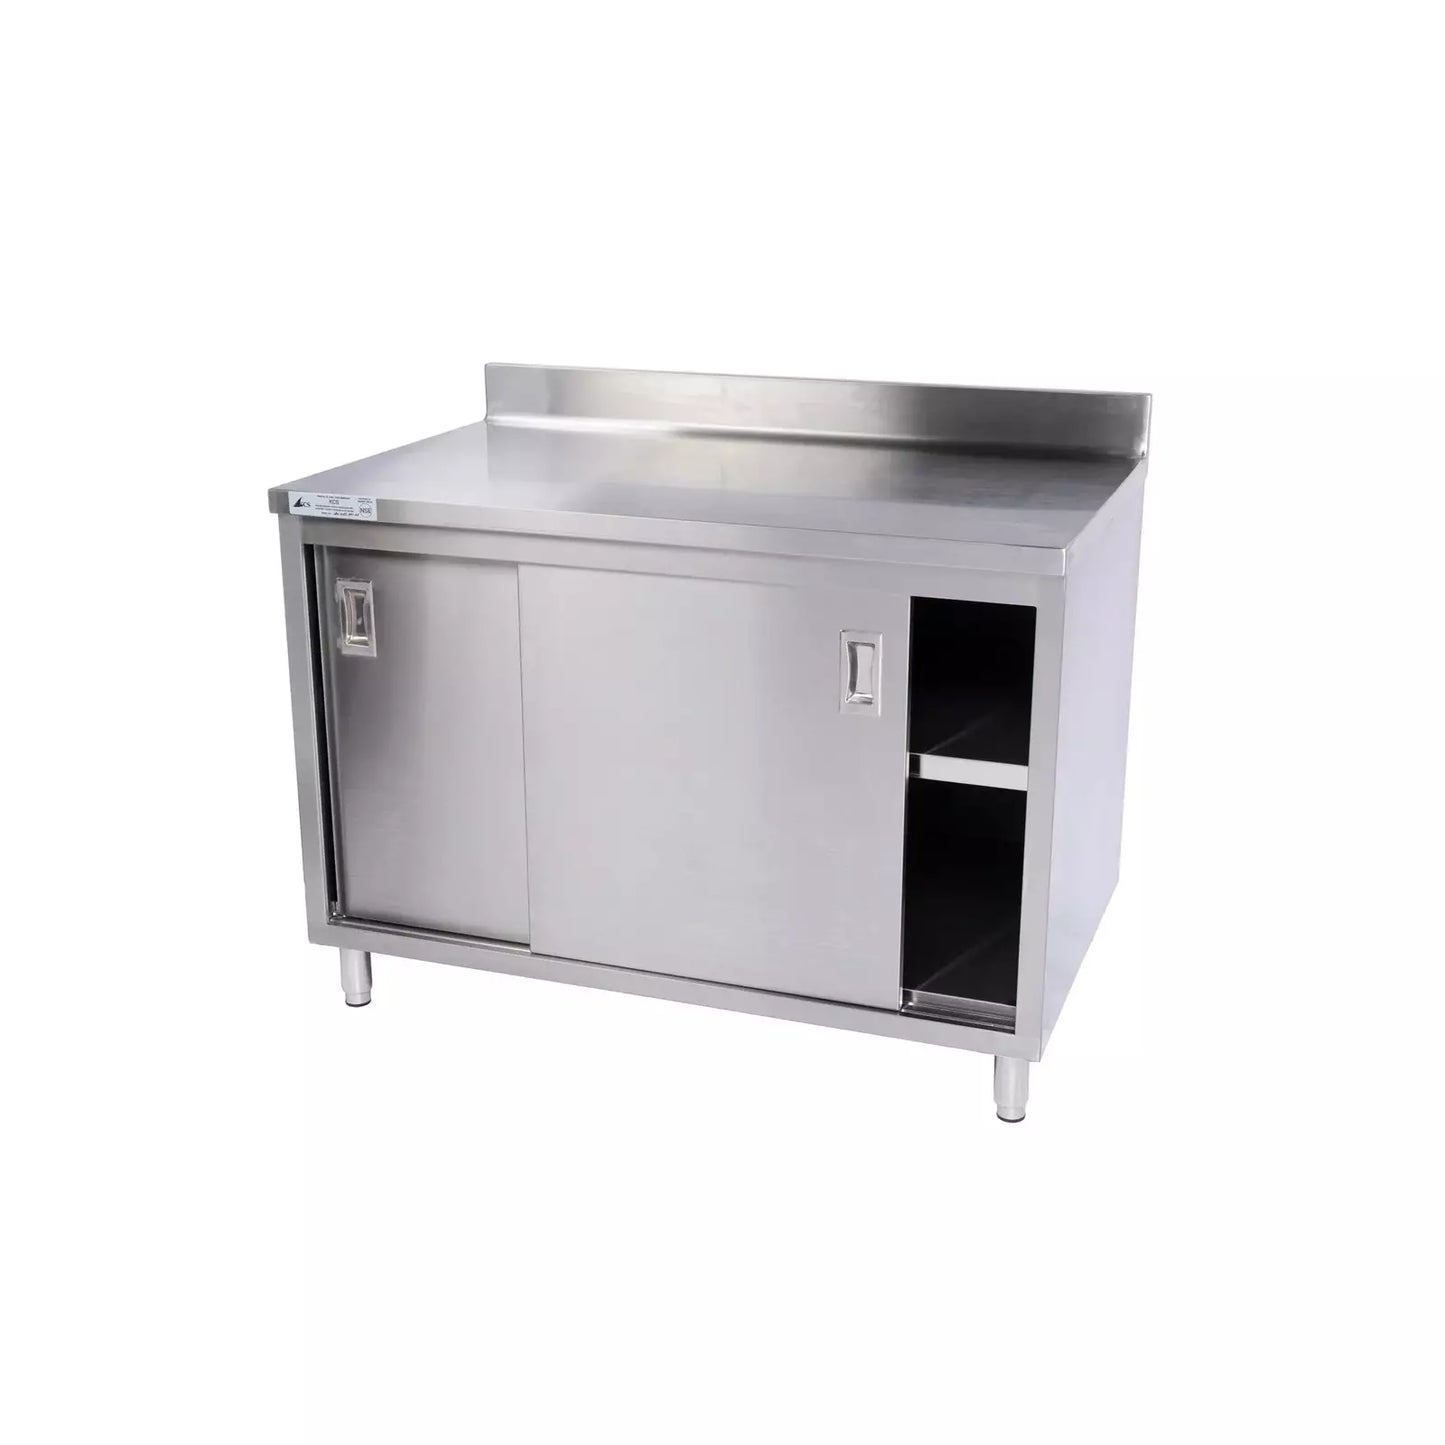 KCS CBS-2472-4BS 24" x 72" Stainless Steel Storage Welded Cabinet with With 2 Sliding Doors and 4" Backsplash